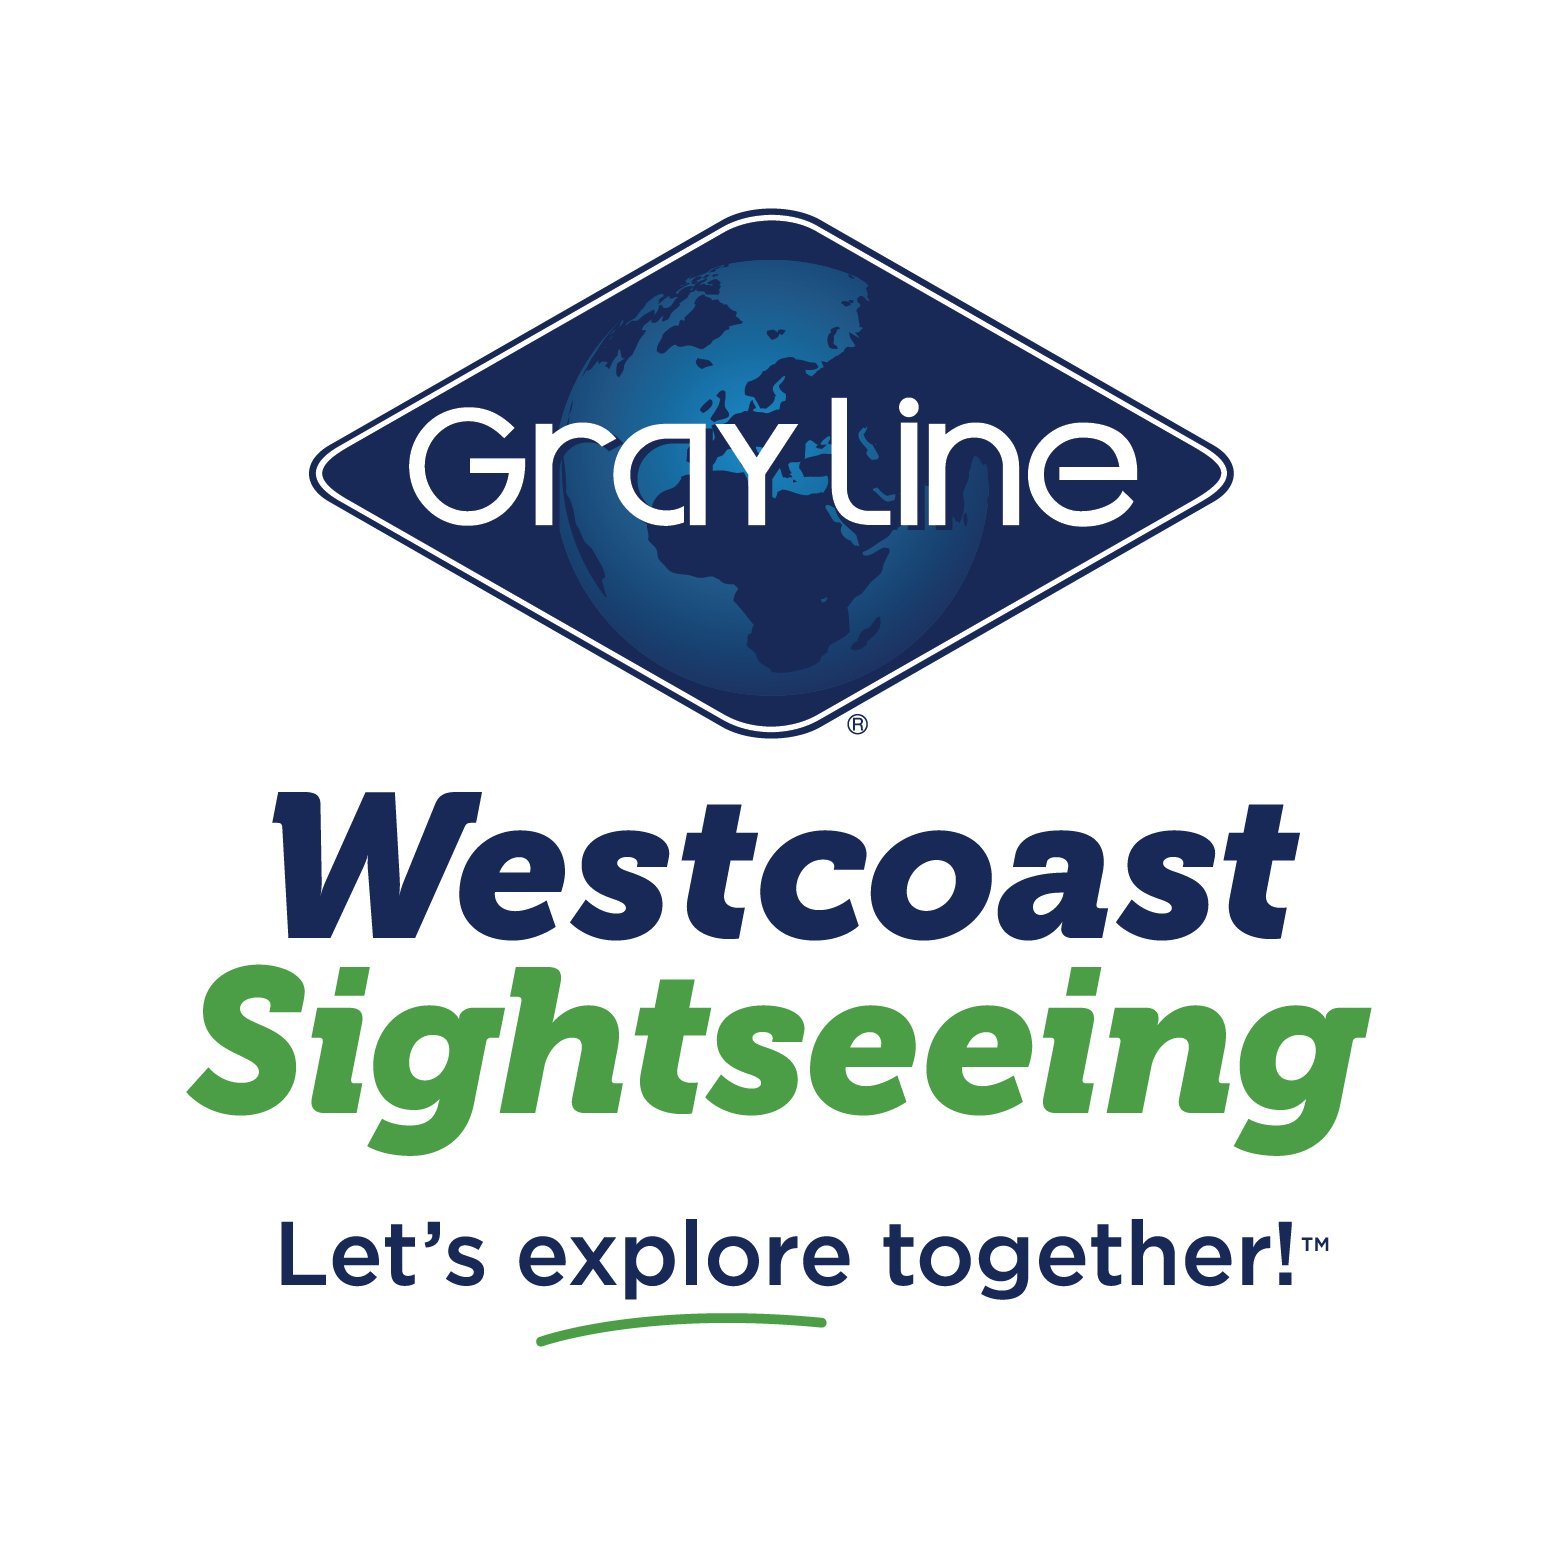 Gray Line Westcoast Sightseeing offers day tours in the Vancouver area. Join us for a tour of Whistler, Victoria, Vancouver or a Hop-On, Hop-Off tour!